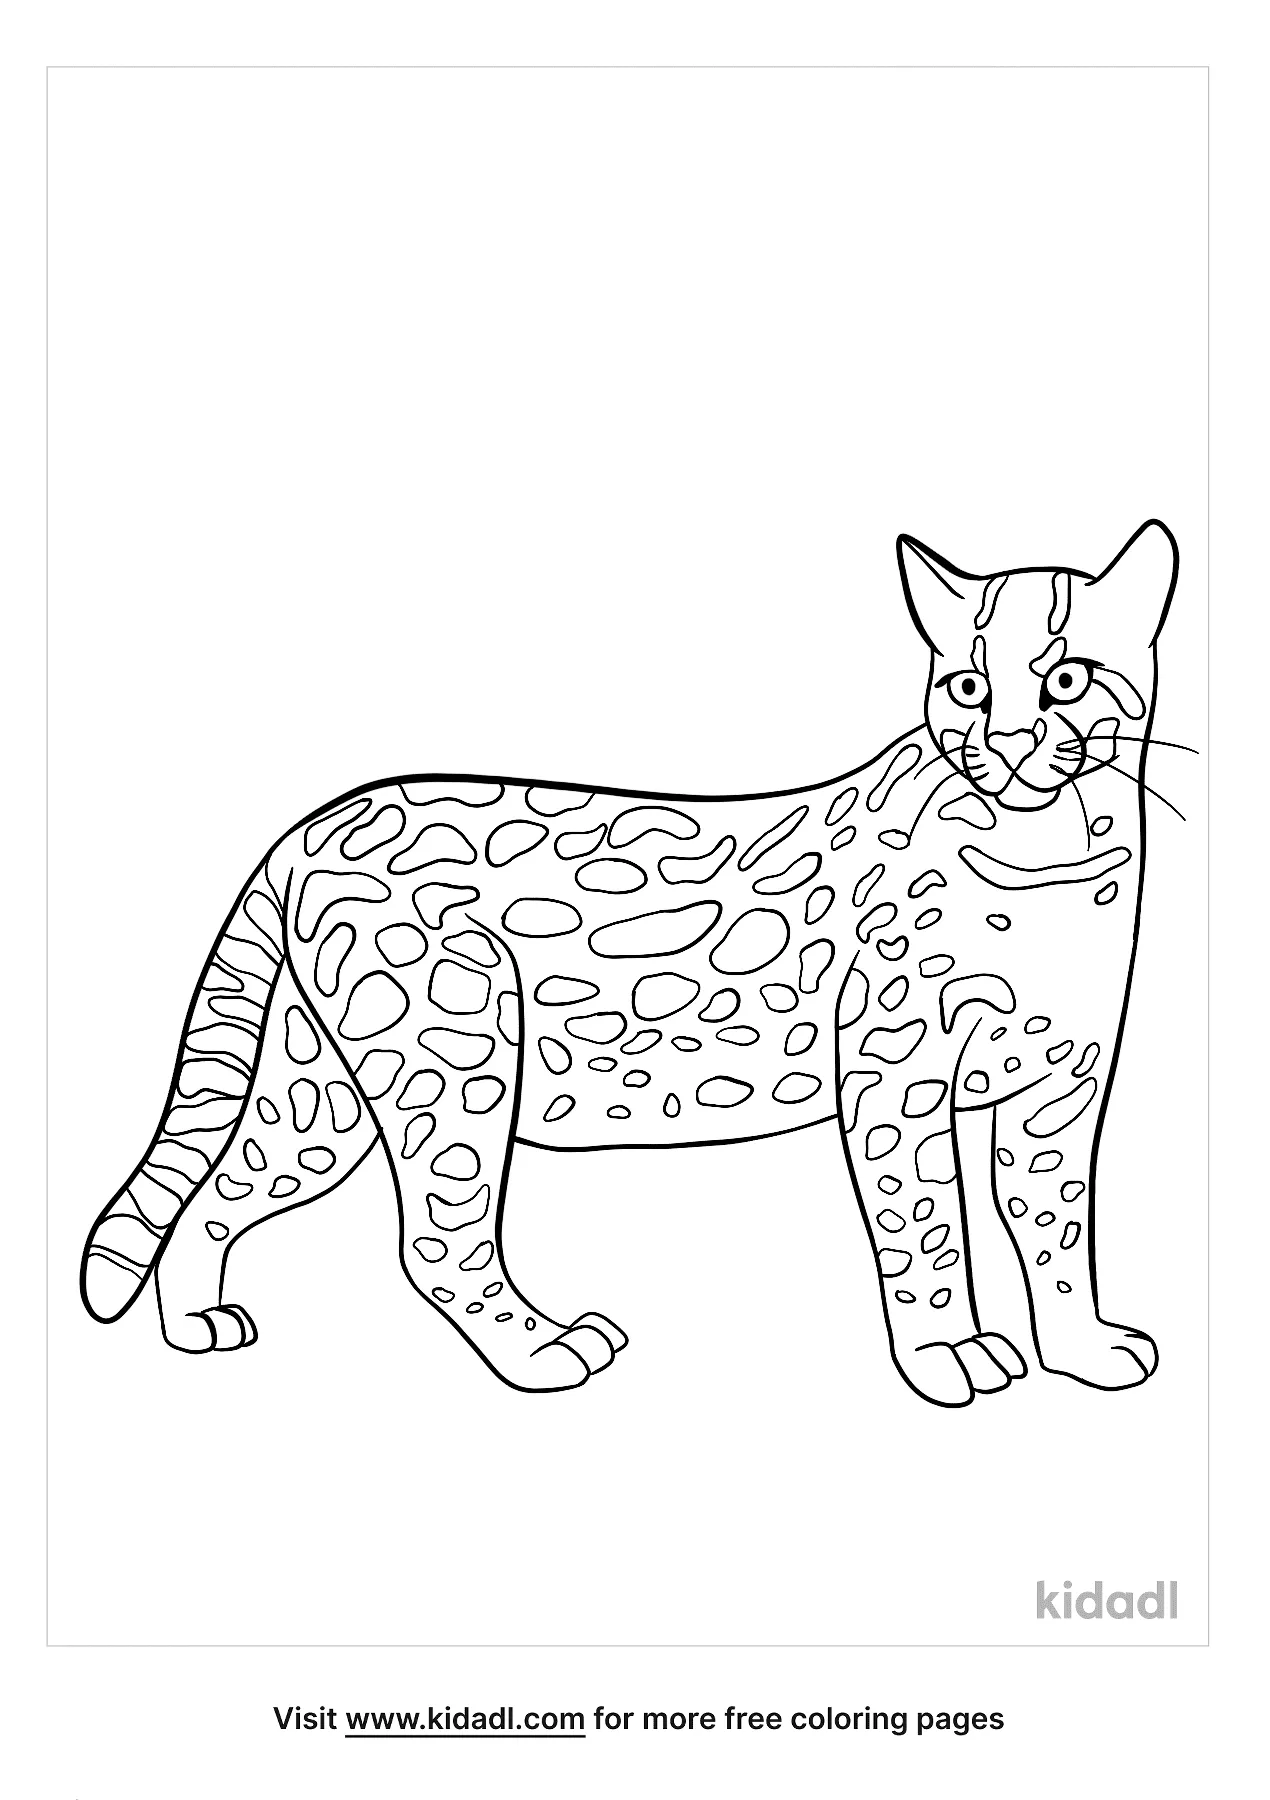 Ocelot Coloring Page - Ultimate Wallpaper